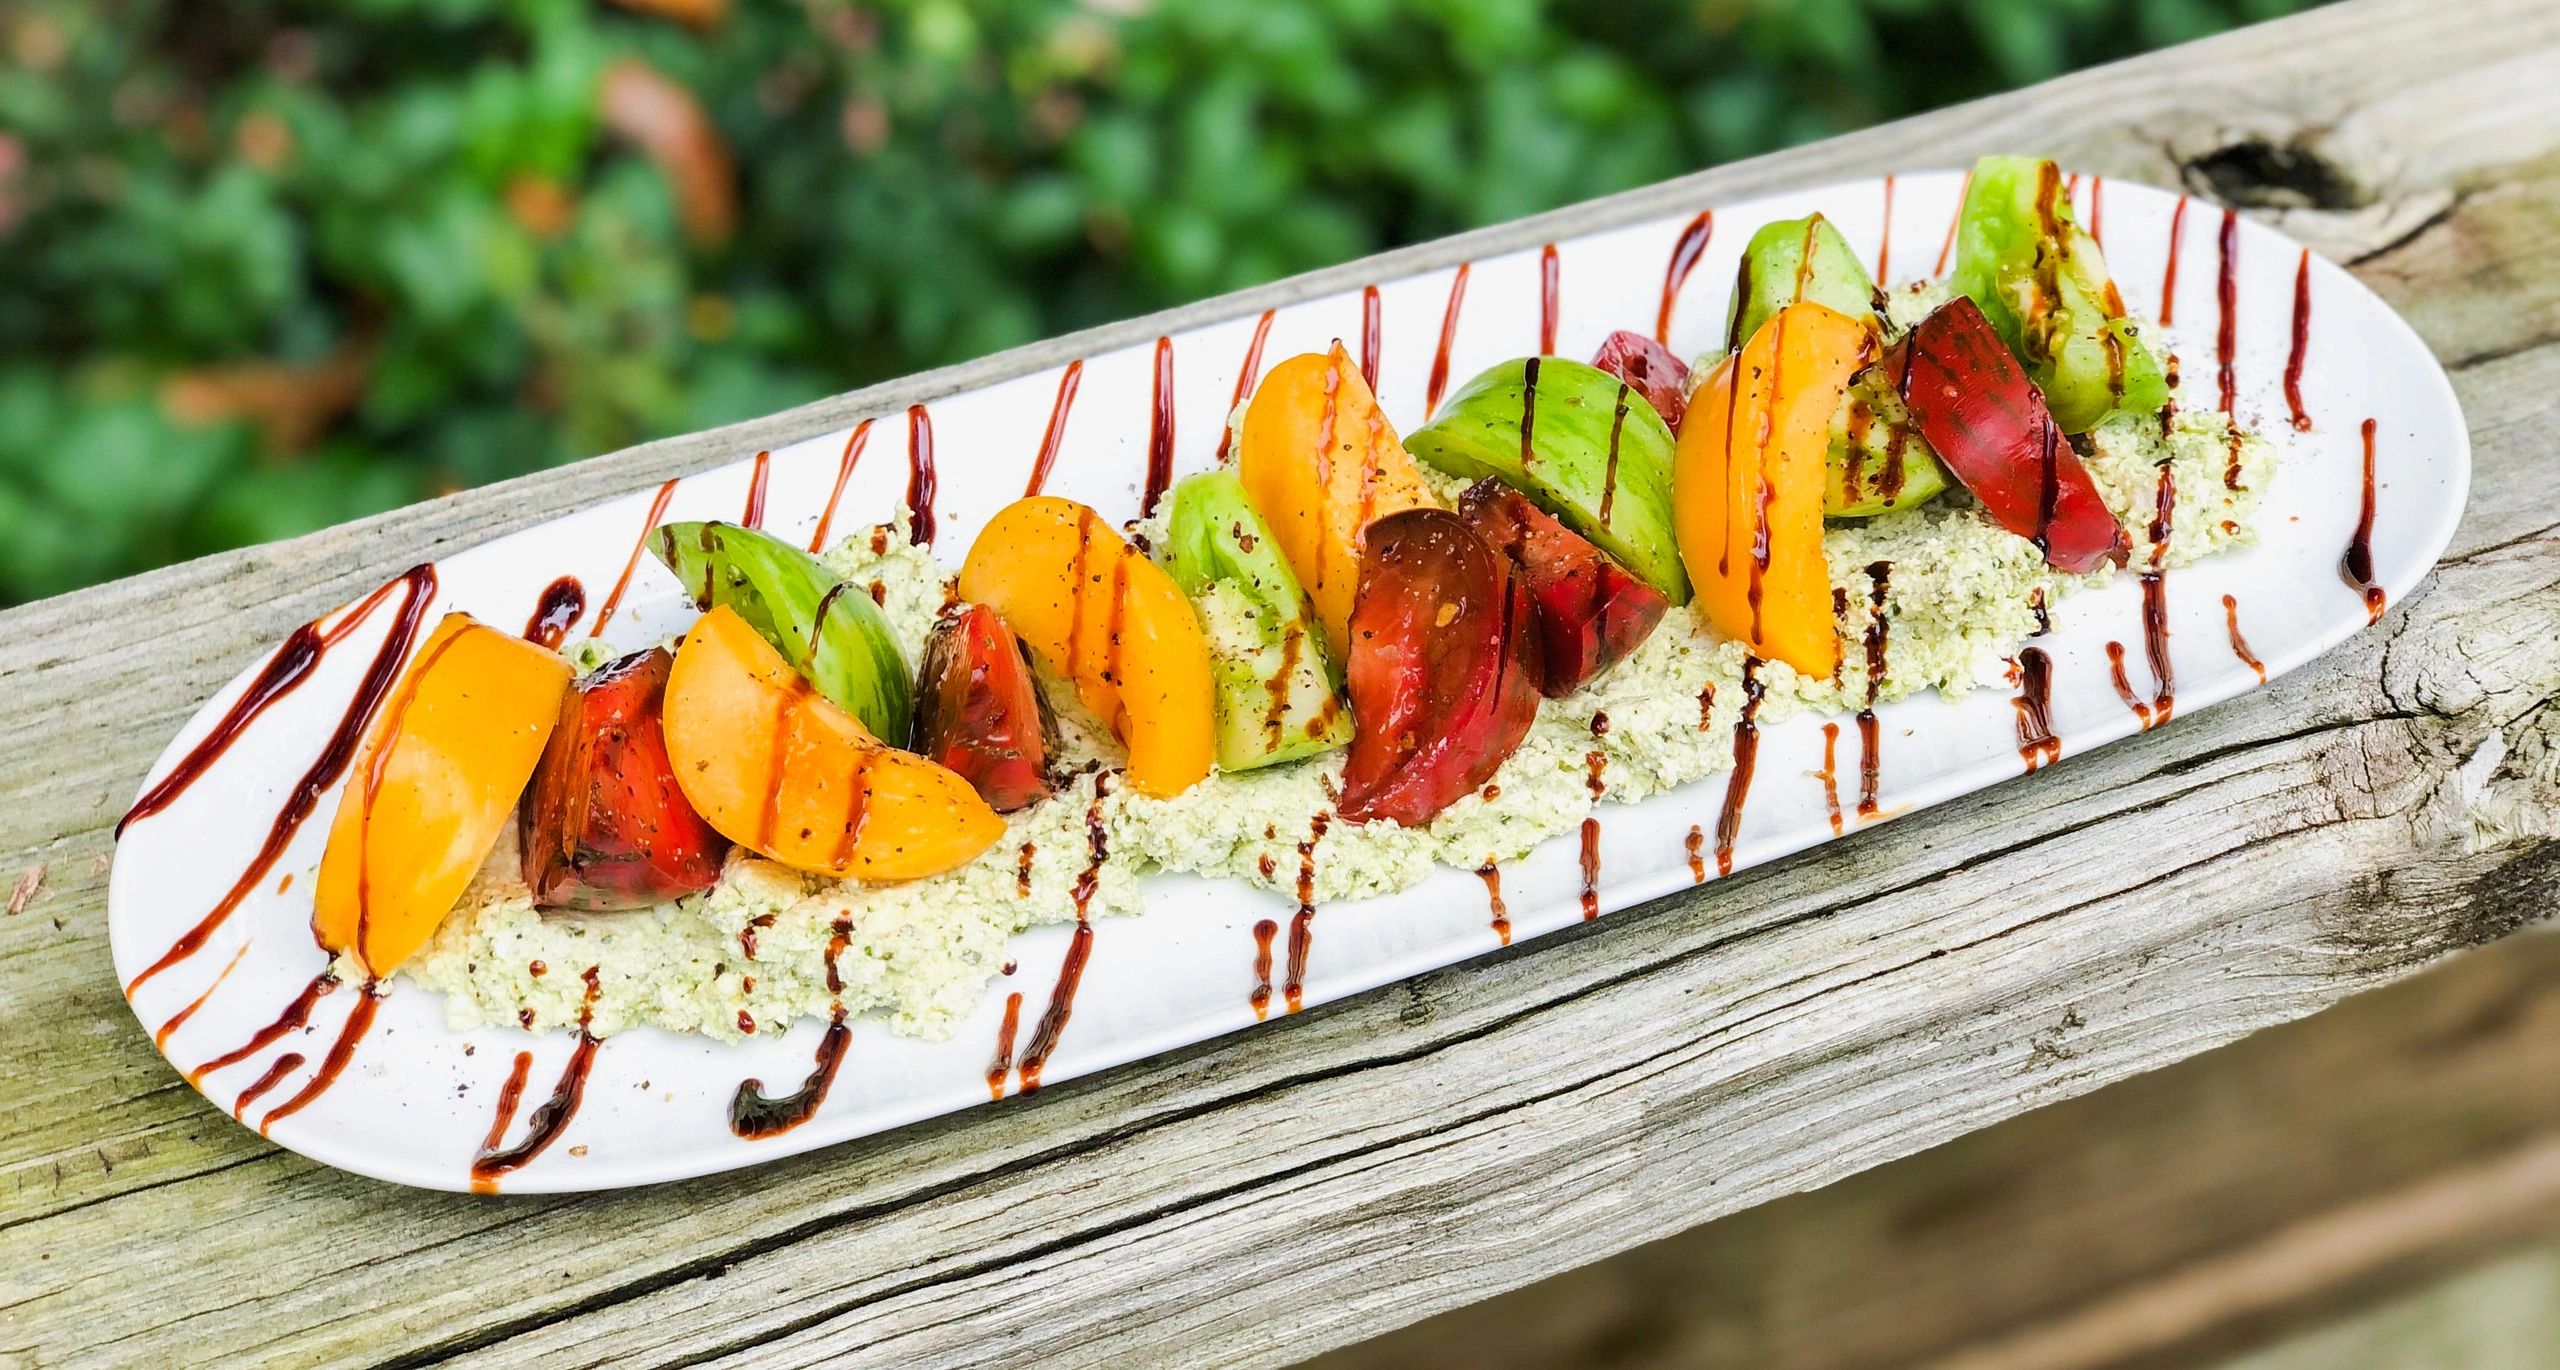 Heirloom Tomatoes with Ricotta and Savory Granola Recipe - Justin